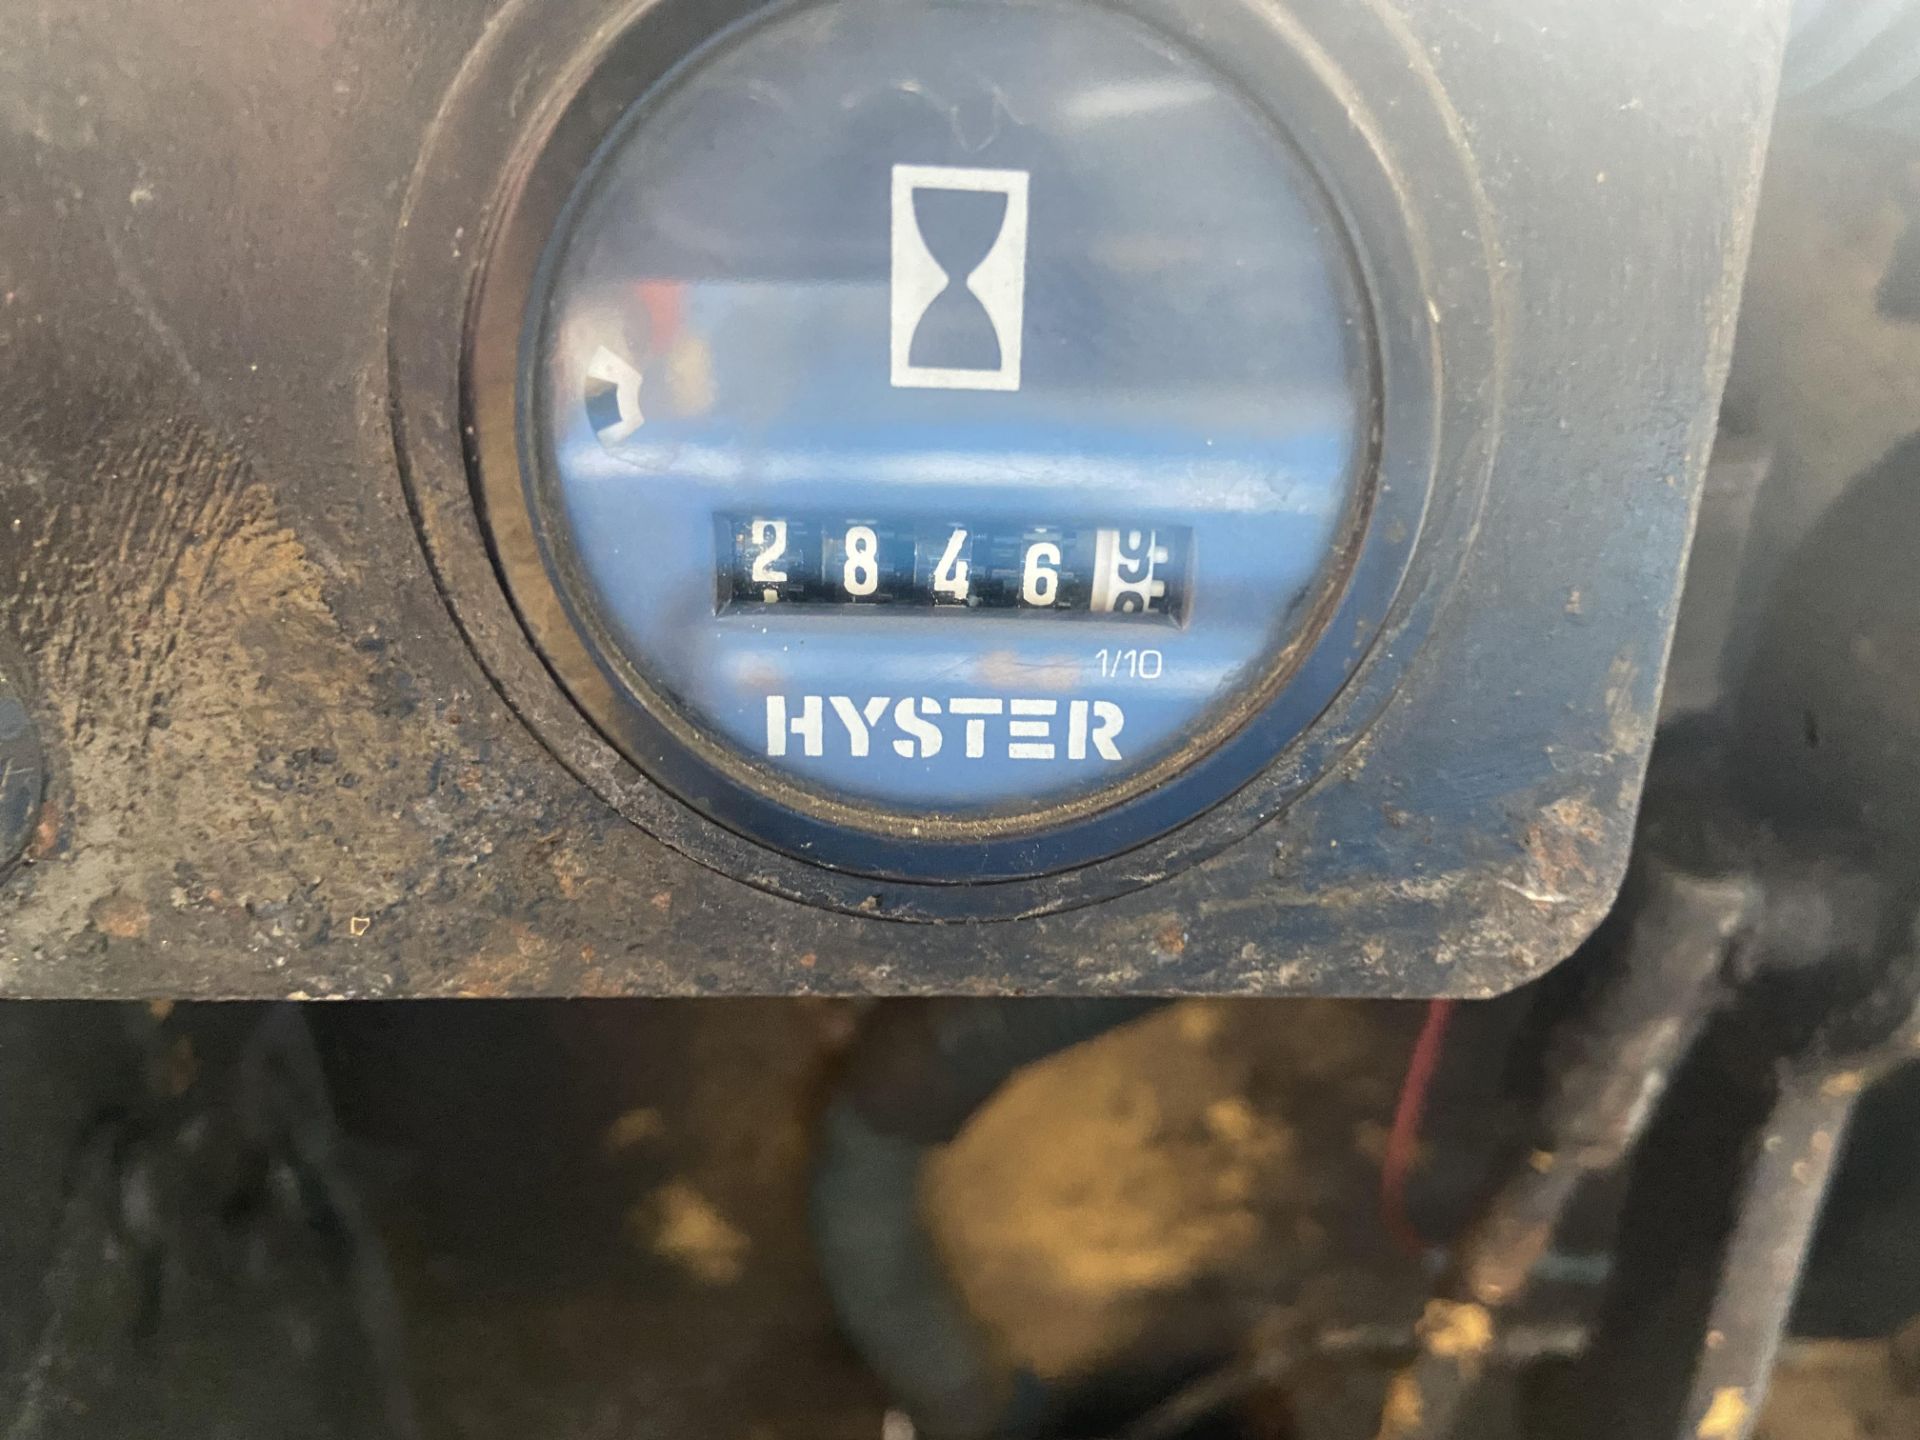 Hyster 50XL Vesta 1500kg cap. LPG Fork Lift Truck, serial no. C001B, indicated hours 2846.9 (at time - Image 7 of 11